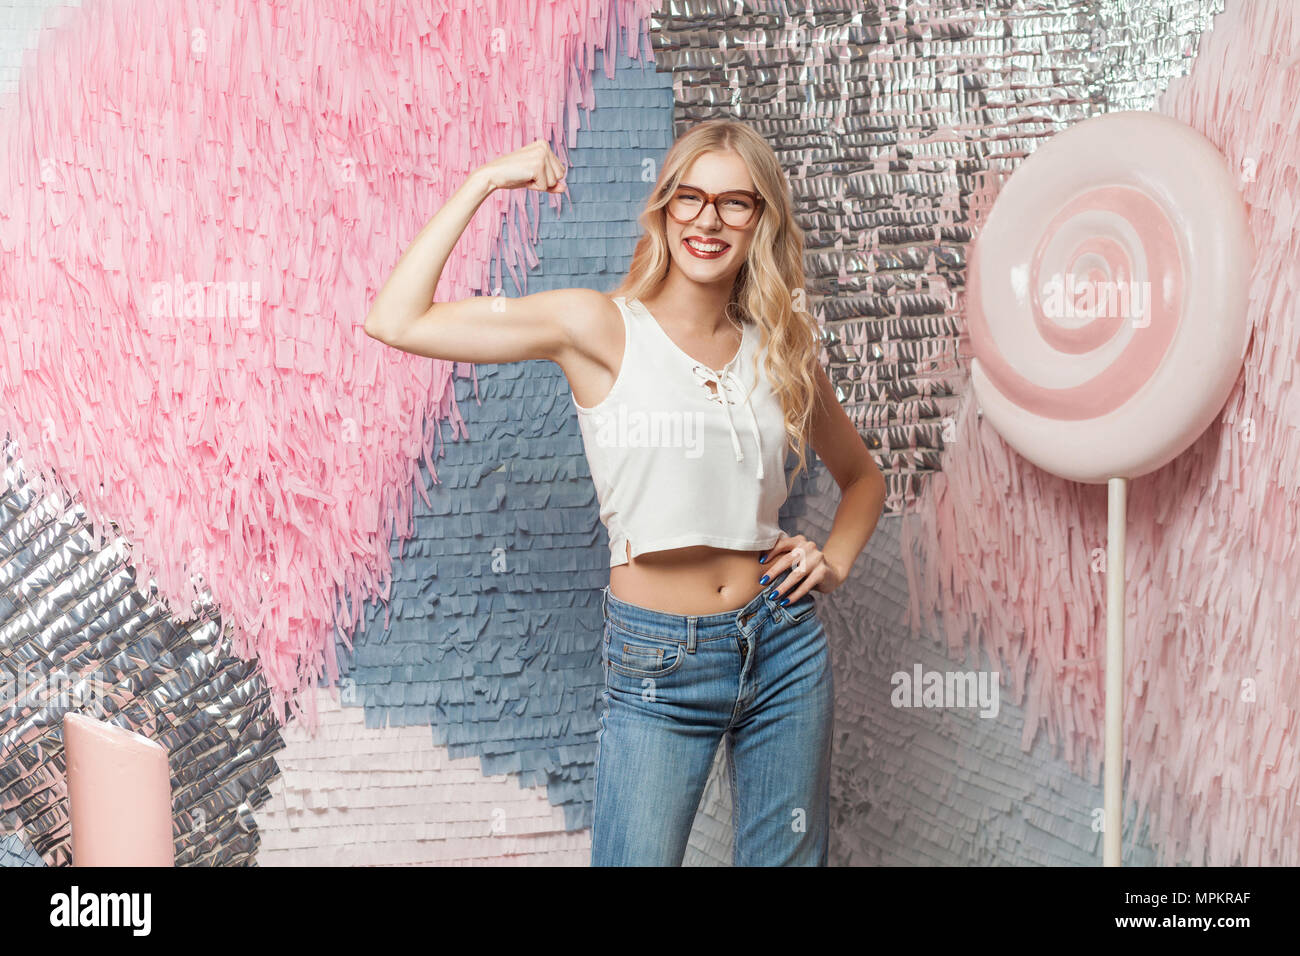 Funny young blonde girl with long hair in red glasses shows her muscles on colorful abstract background with huge candy, dressed in white top and jean Stock Photo